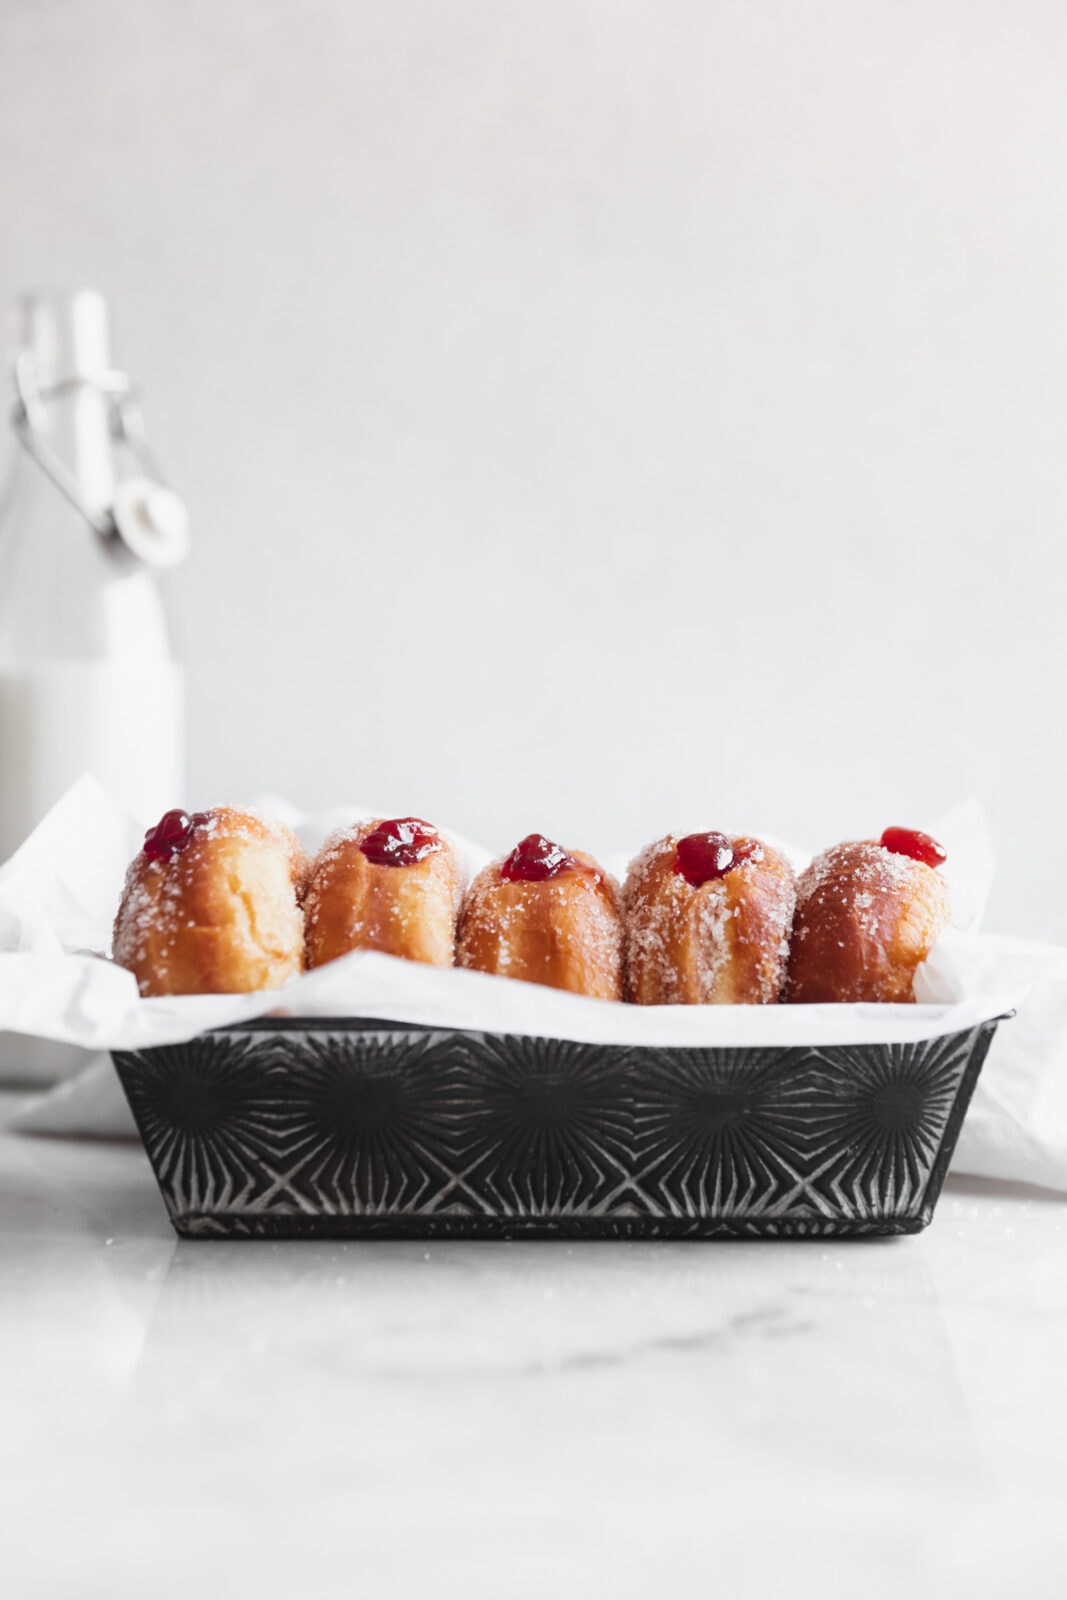 homemade jelly donuts in a pan